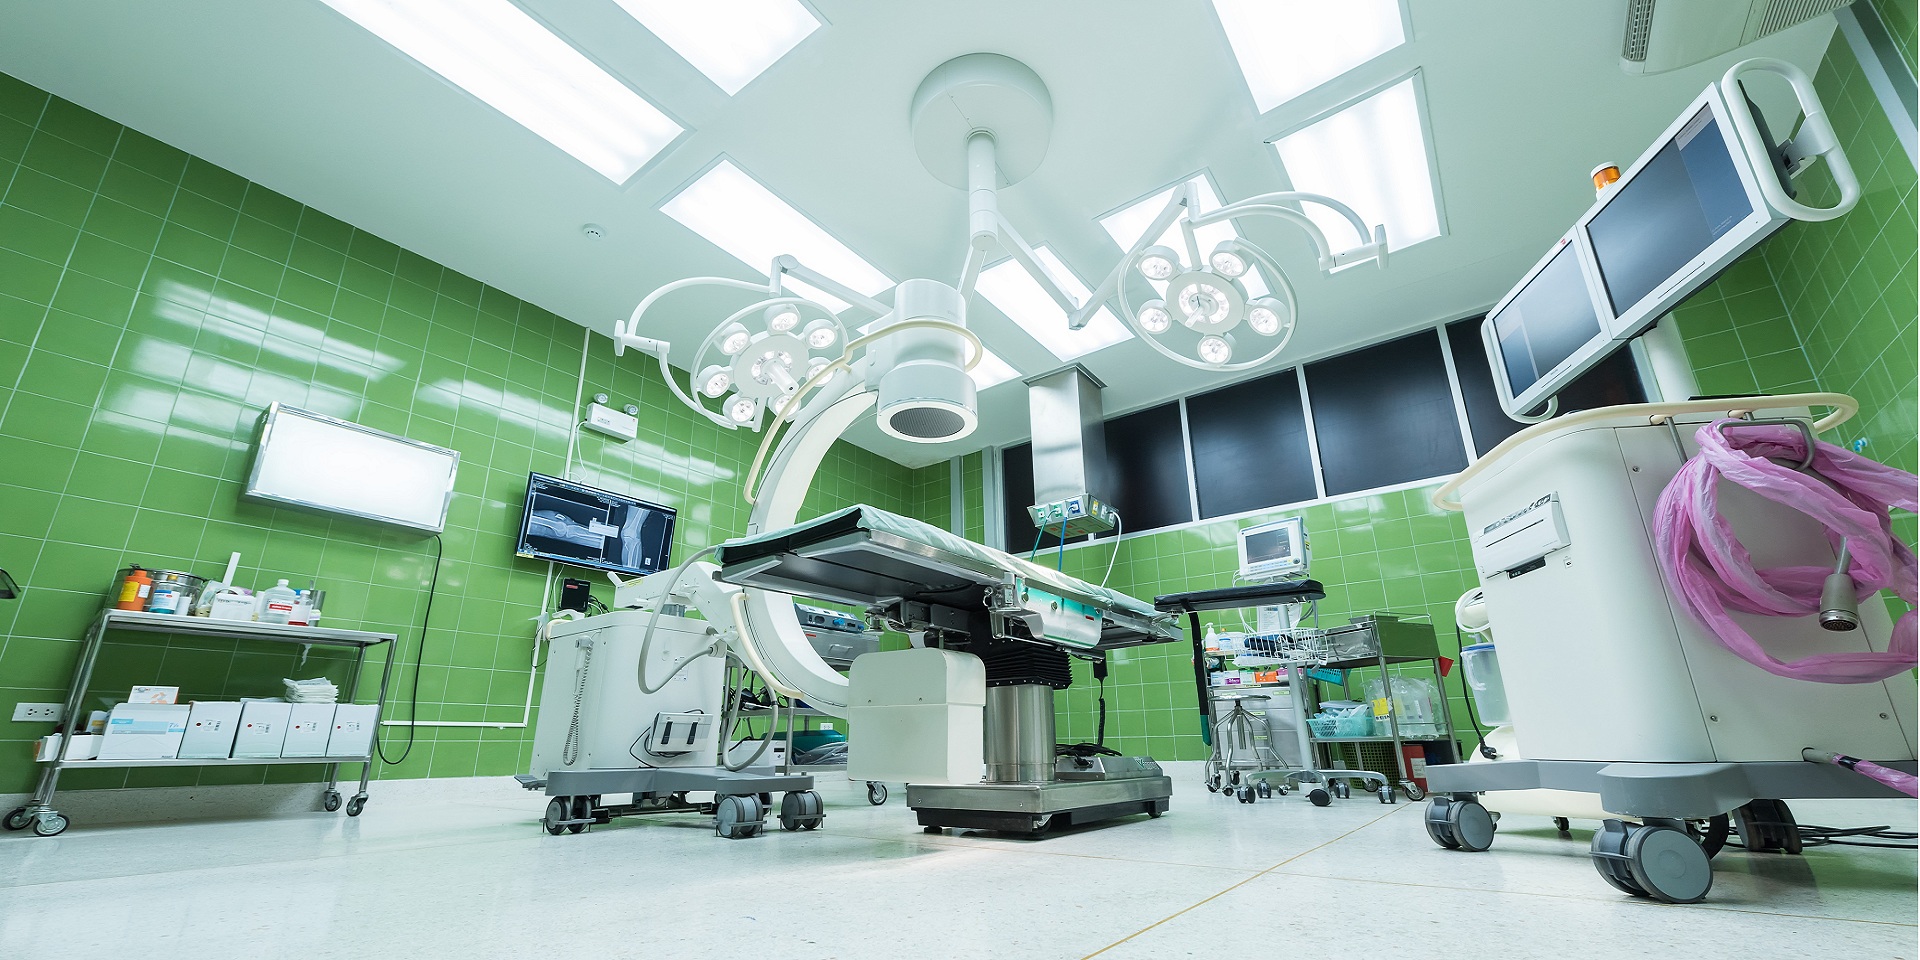 Provide overall solution for operating room